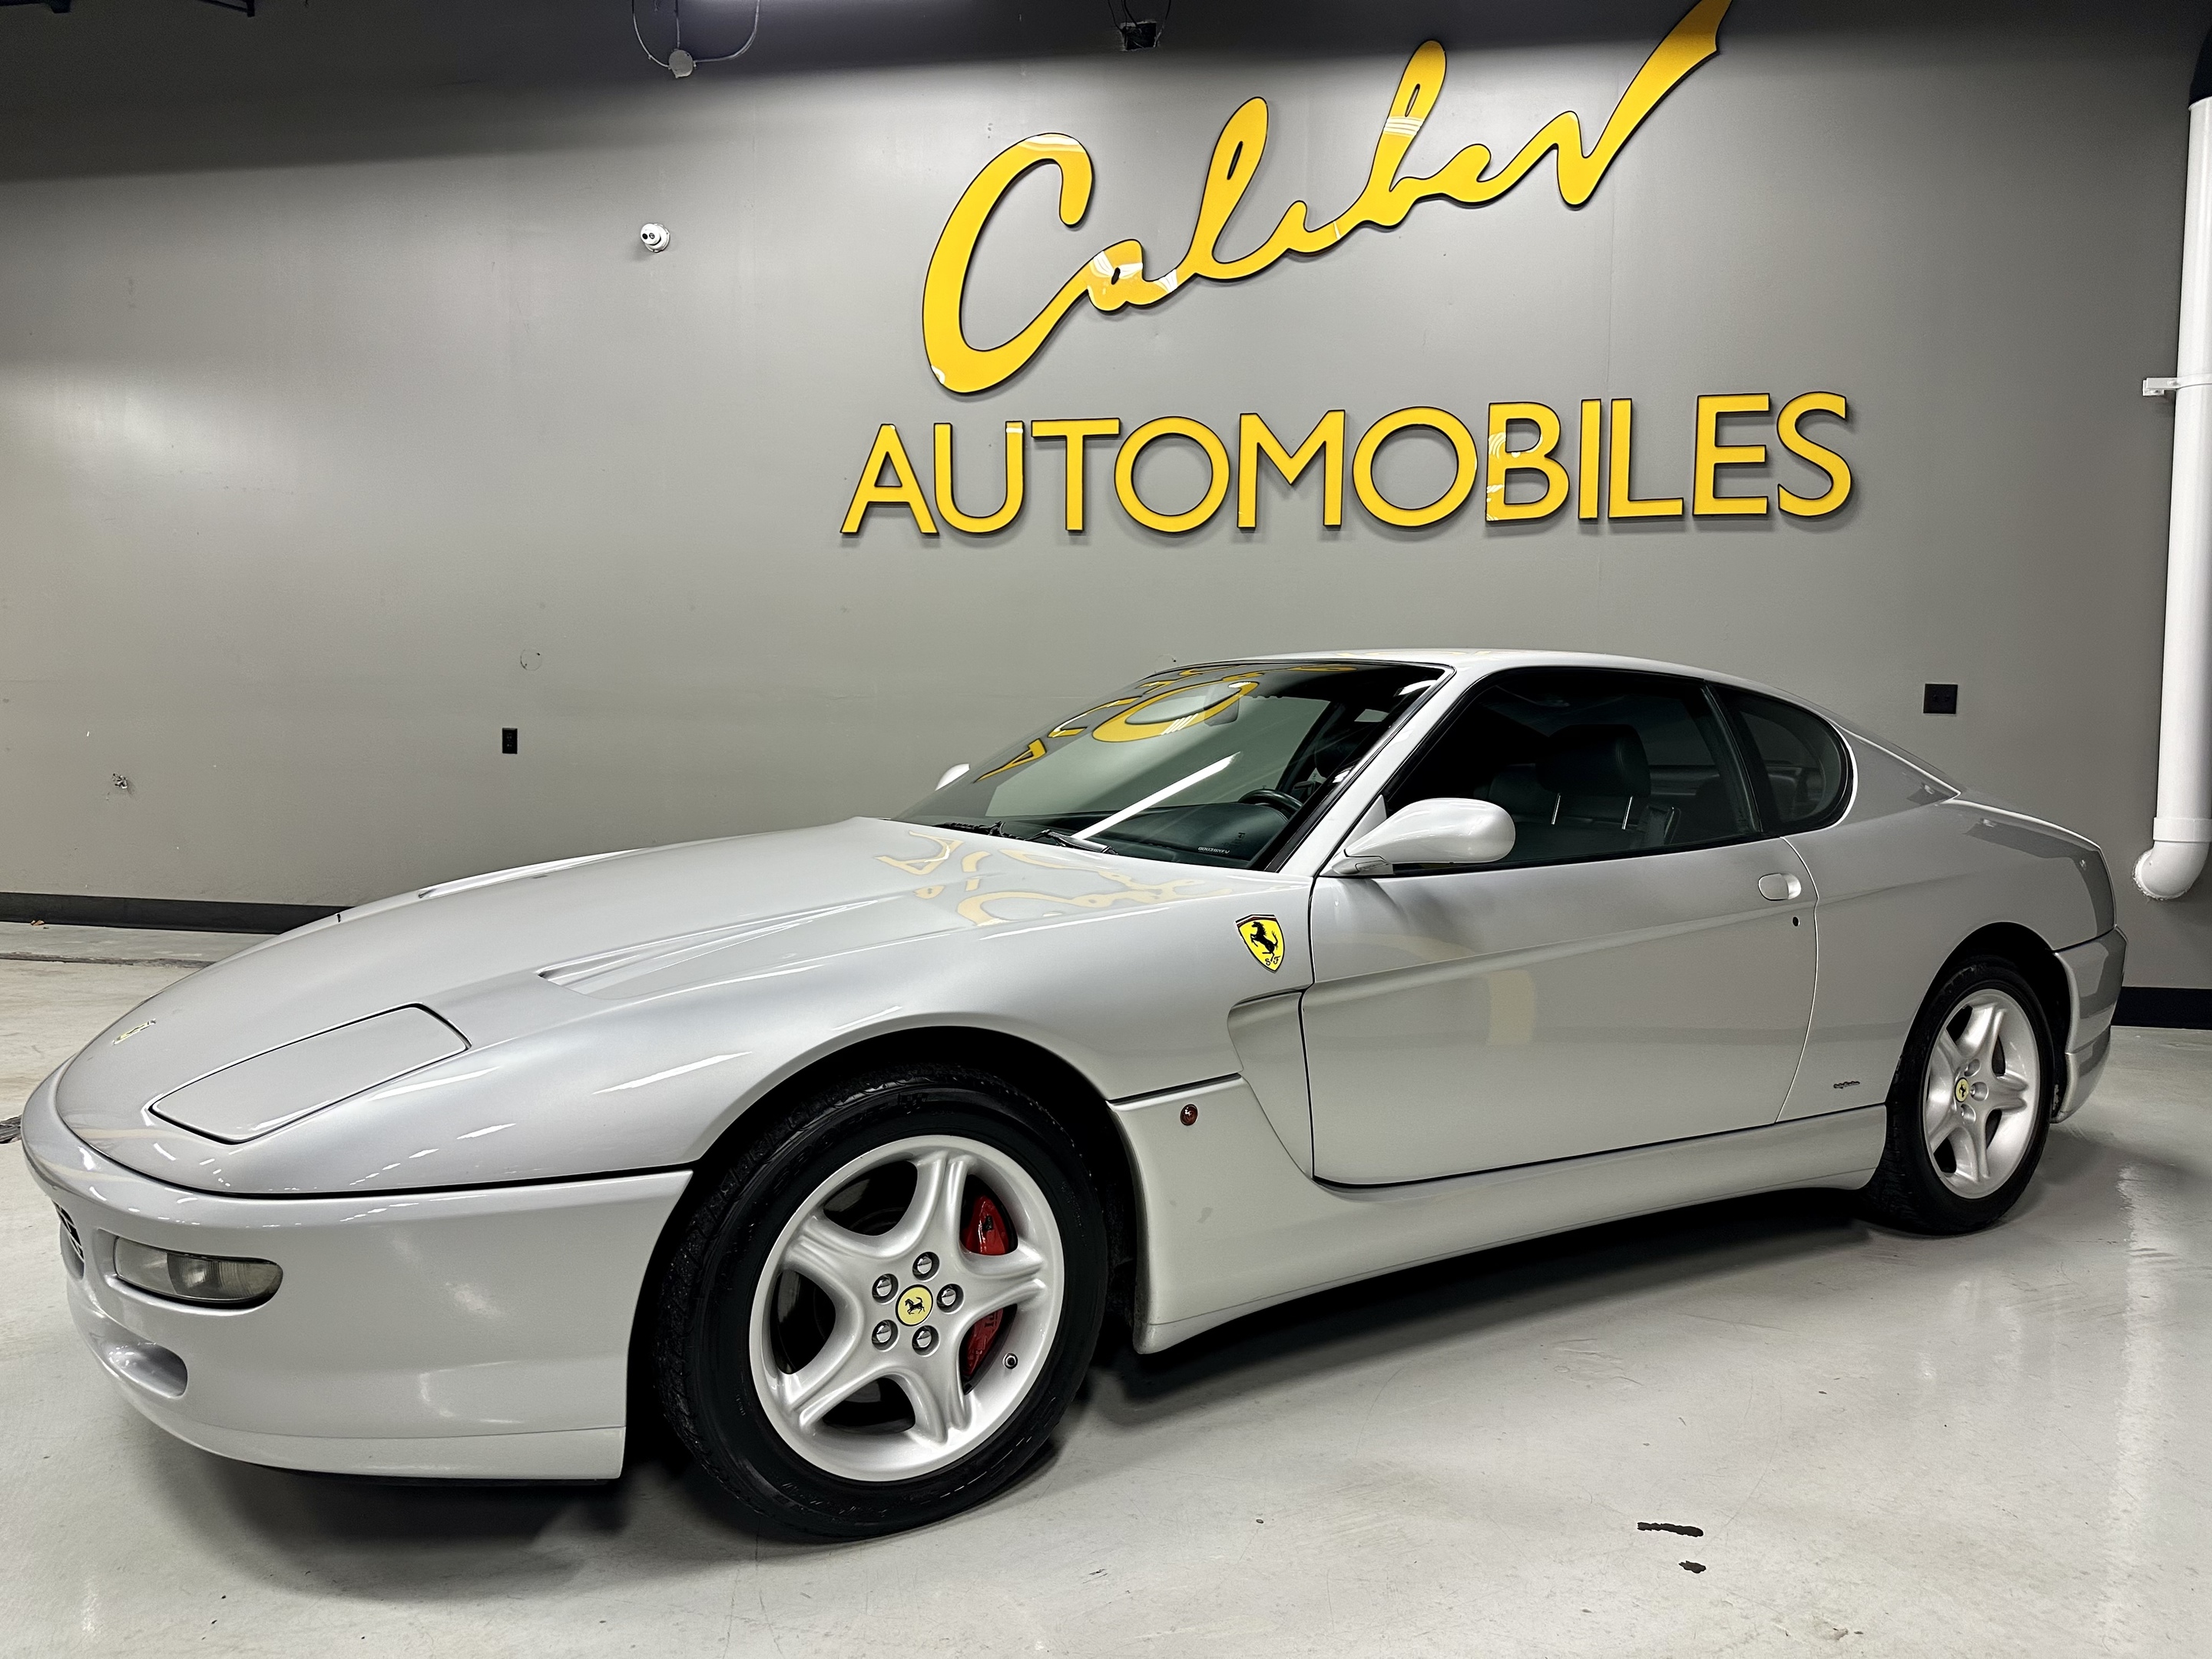 1998 Ferrari 456  ***Major Engine Out Service Just Completed***.